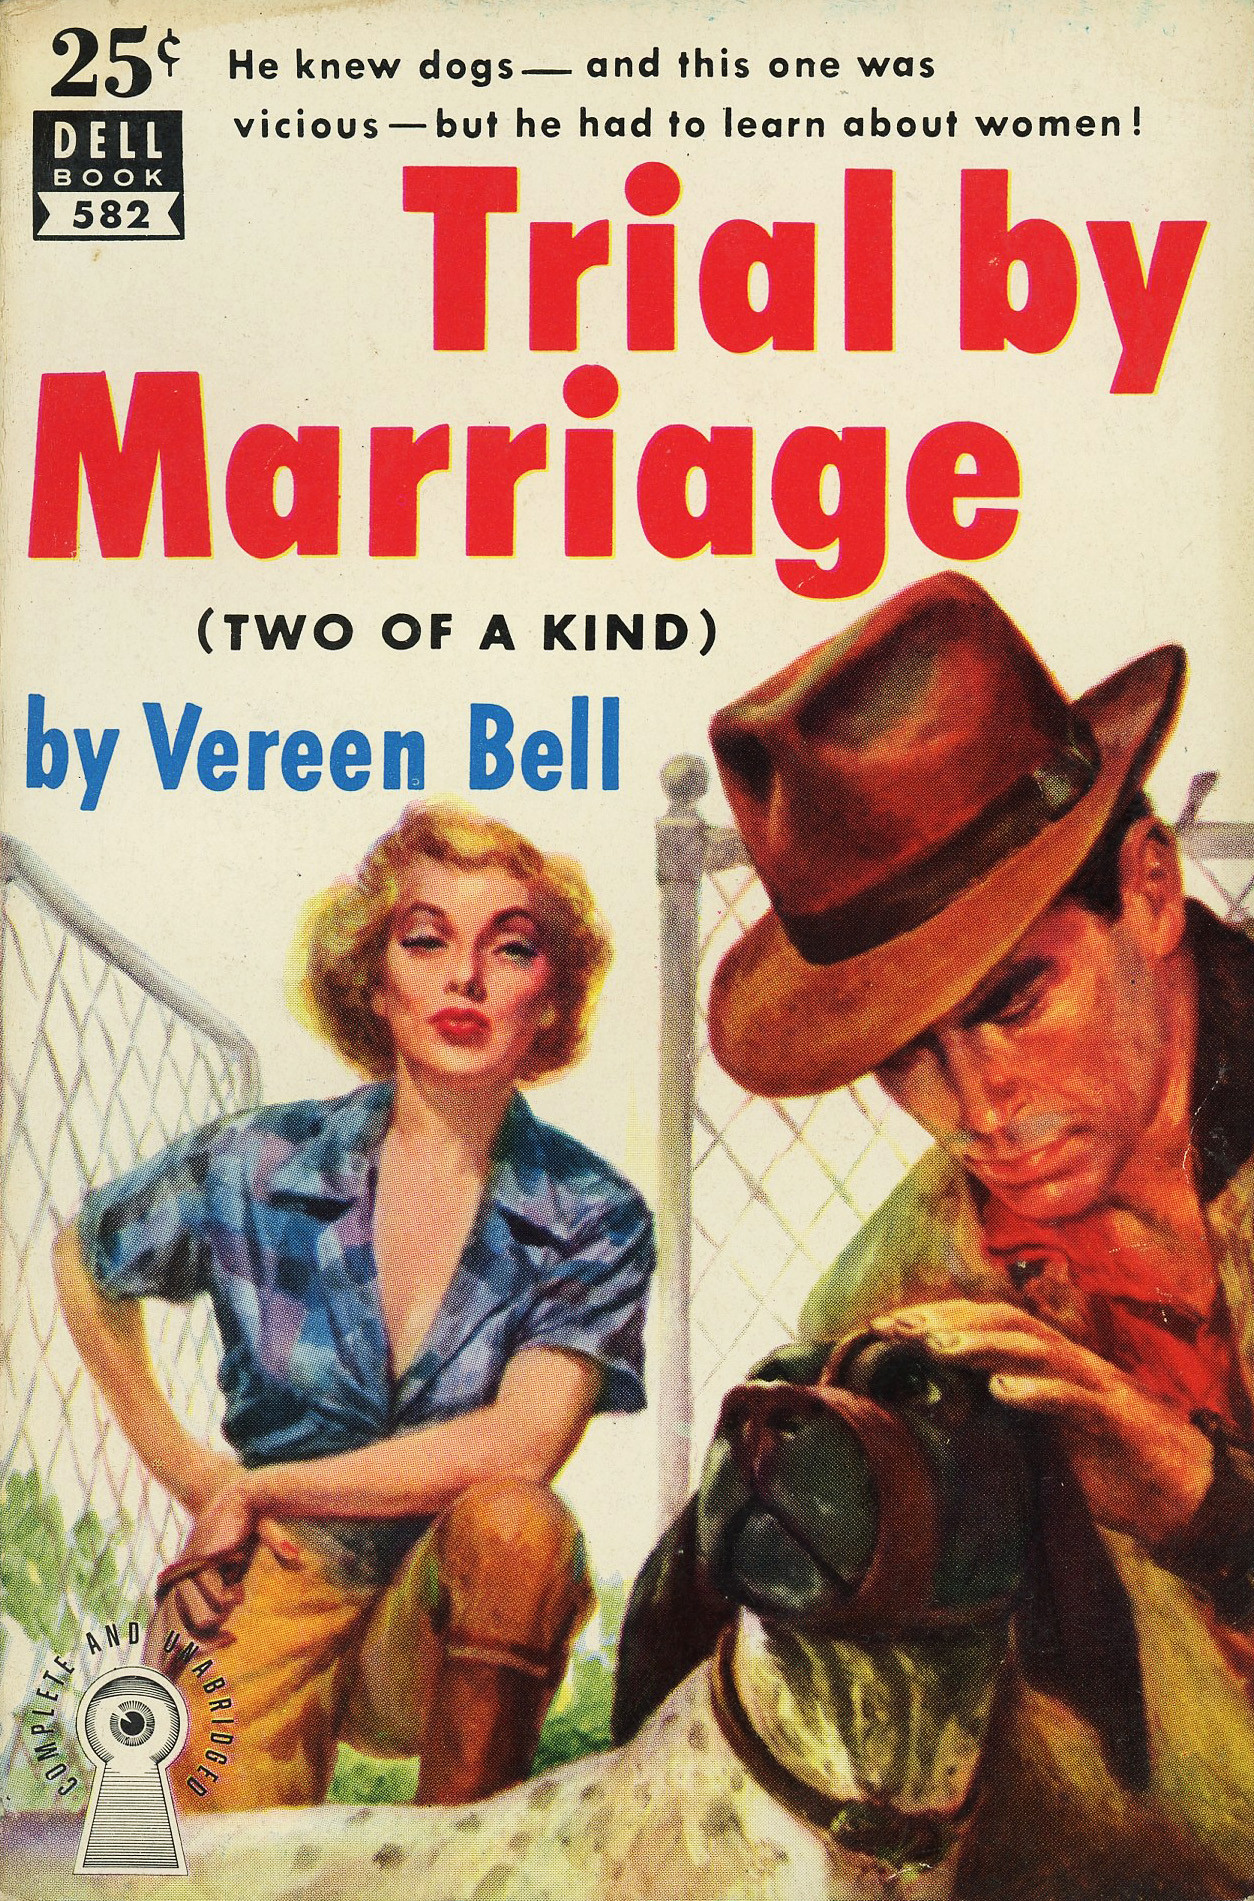 10961922644-dell-books-582-vereen-bell-trial-by-marriage